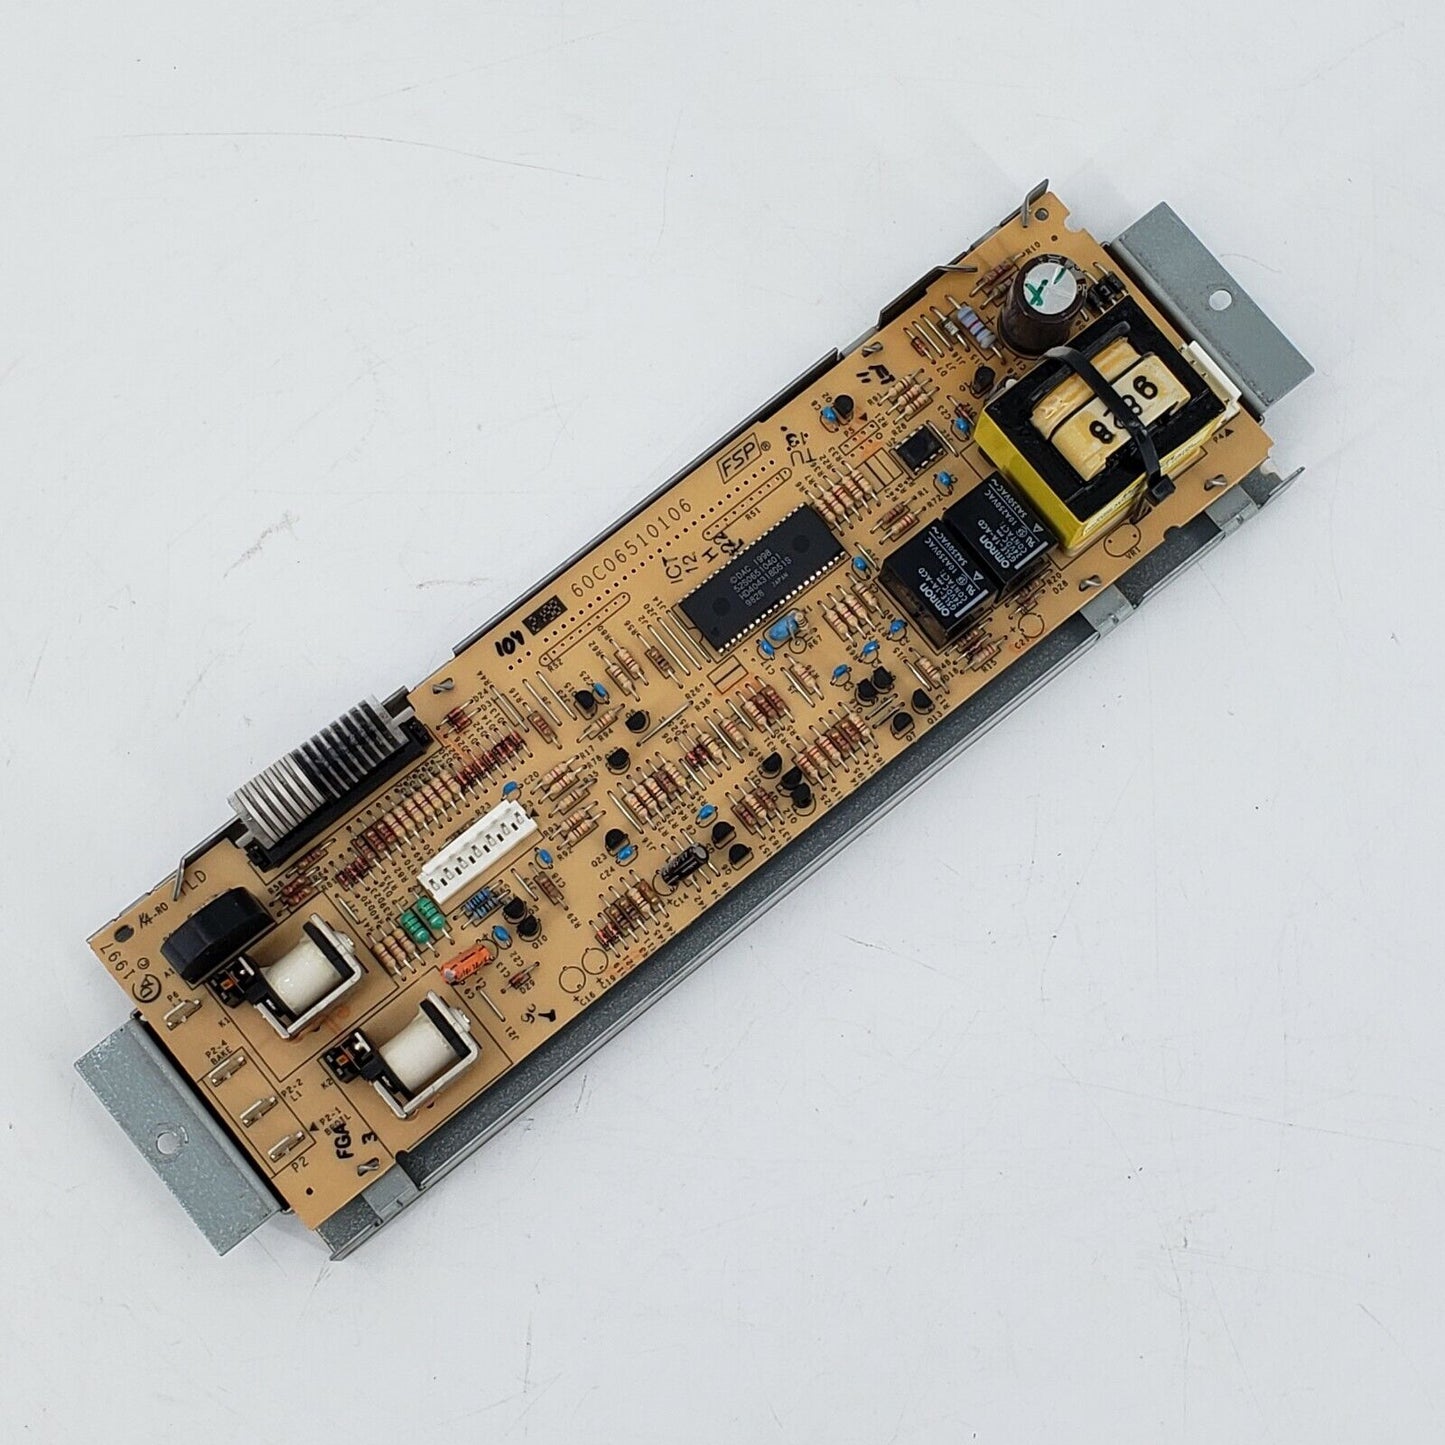 OEM Replacement for Whirlpool Range Oven Control Board 8053741